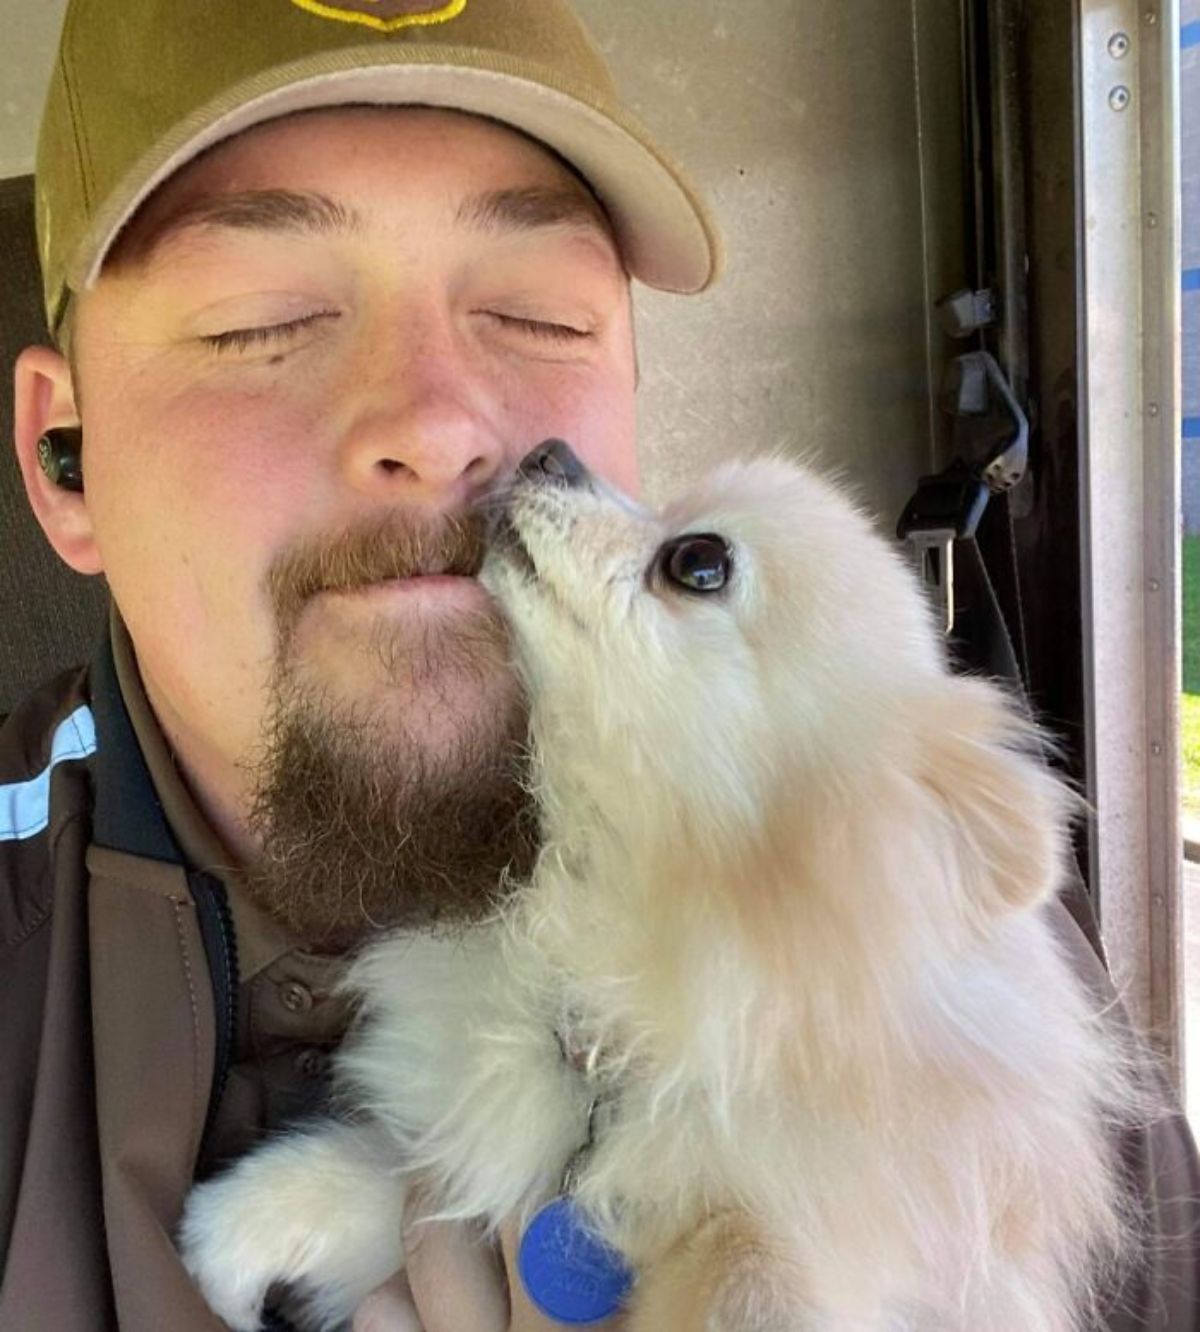 male ups driver in the truck getting licked in the face by a small fluffy white dog